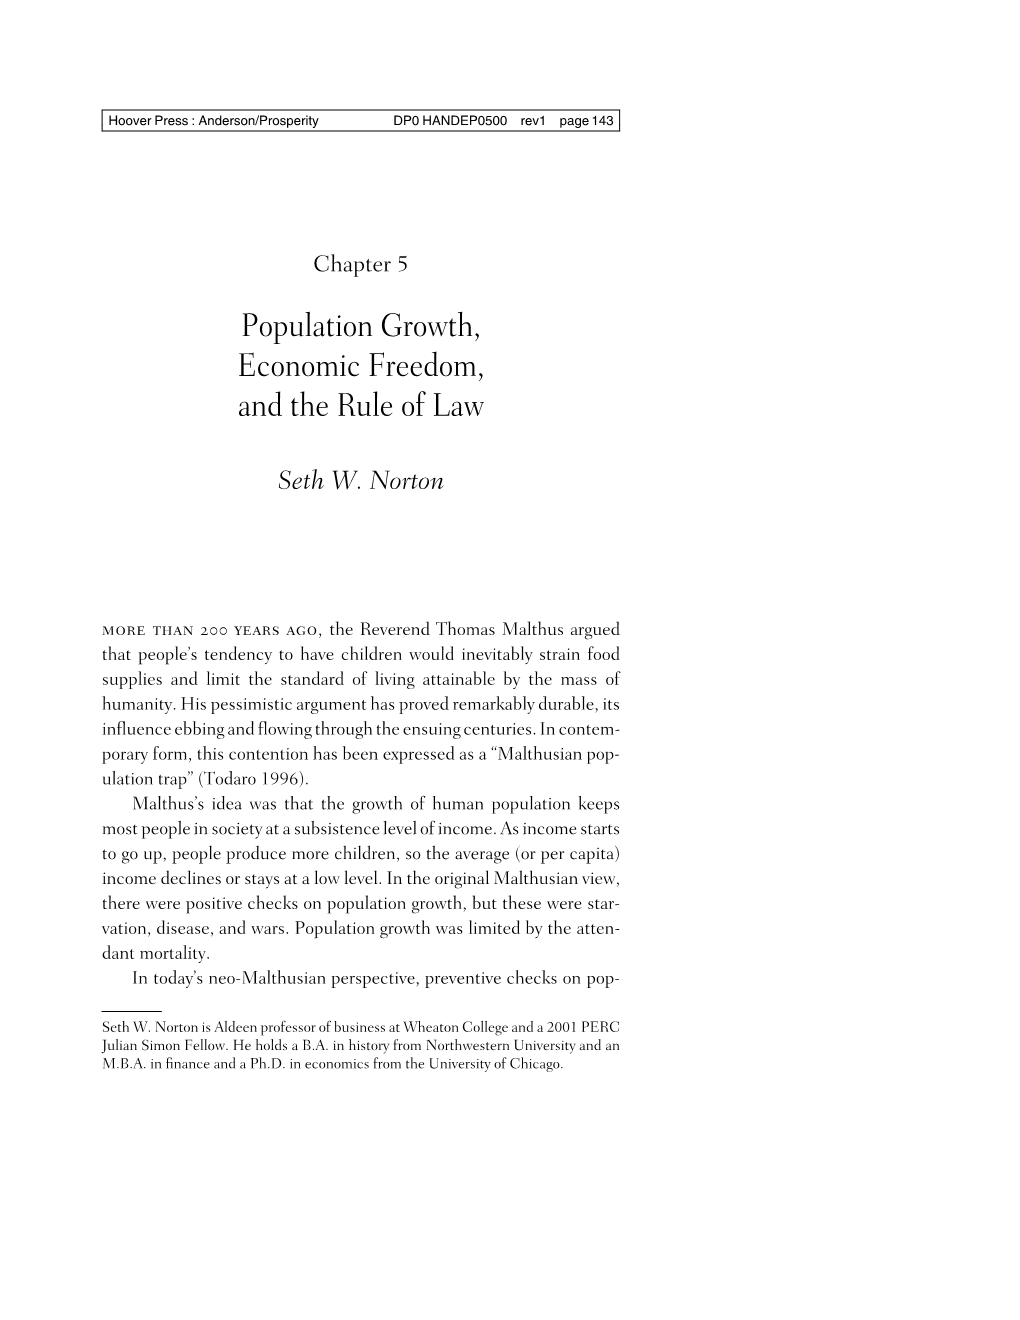 Population Growth, Economic Freedom, and the Rule of Law